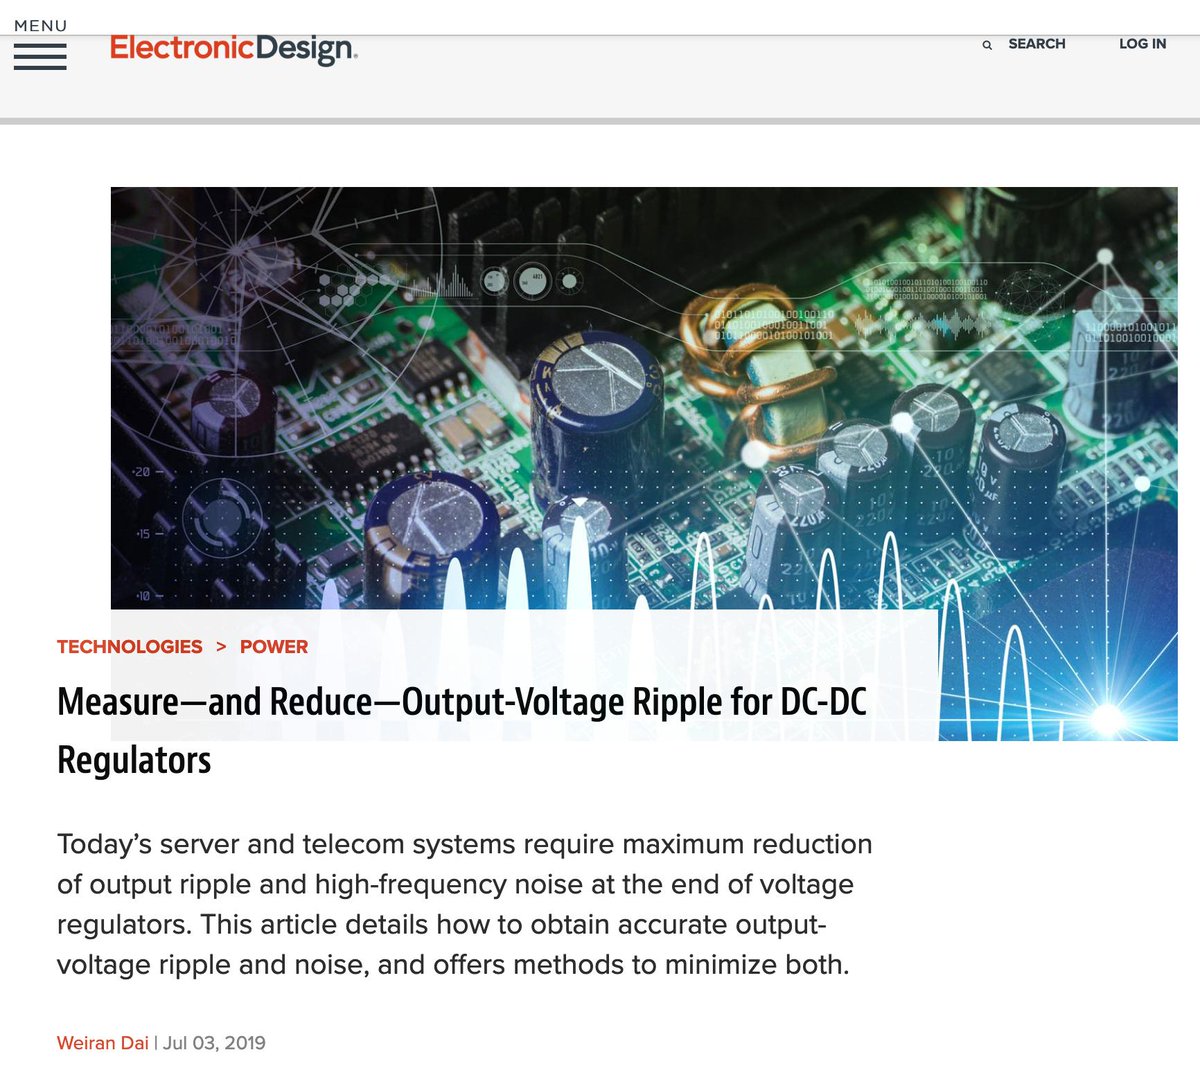 How to measure—and reduce—output-voltage ripple for DC-DC regulators. From @ElectronicDesgn. #voltageregulation
ow.ly/KrNc50uVCbd